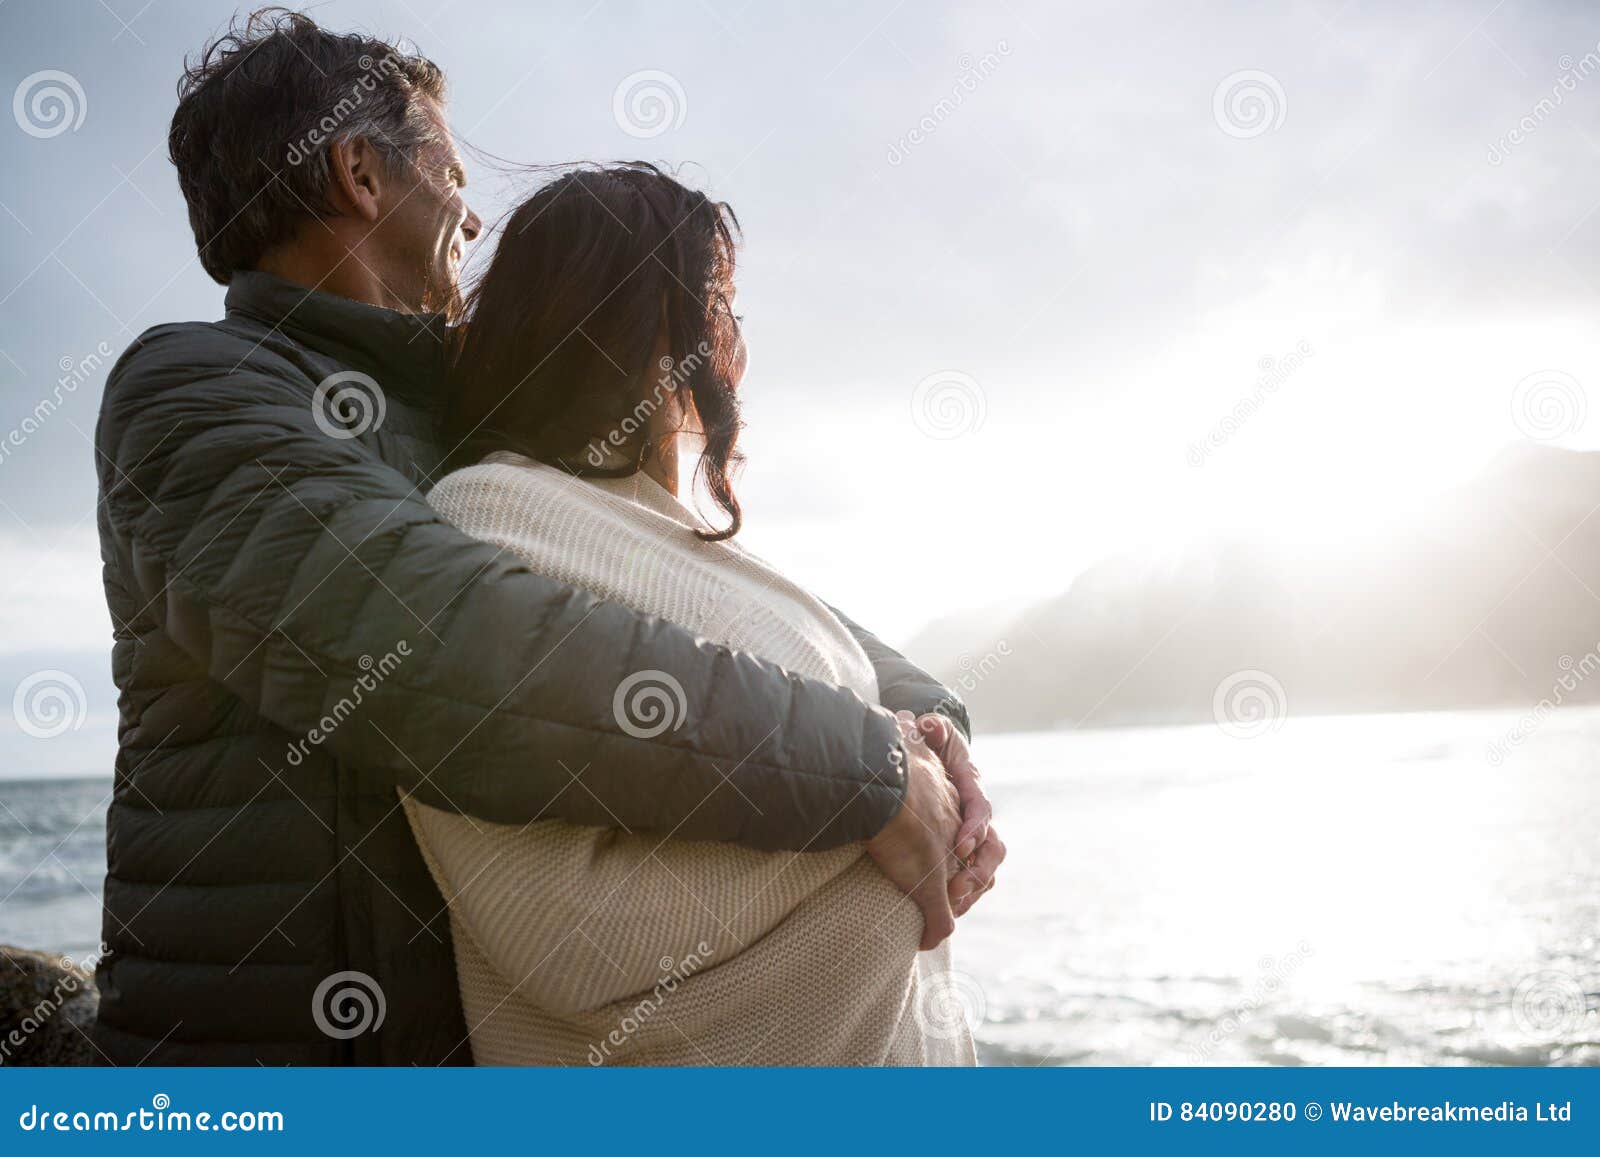 Romantic Couple Embracing Stock Images - Download 57,545 Royalty Free